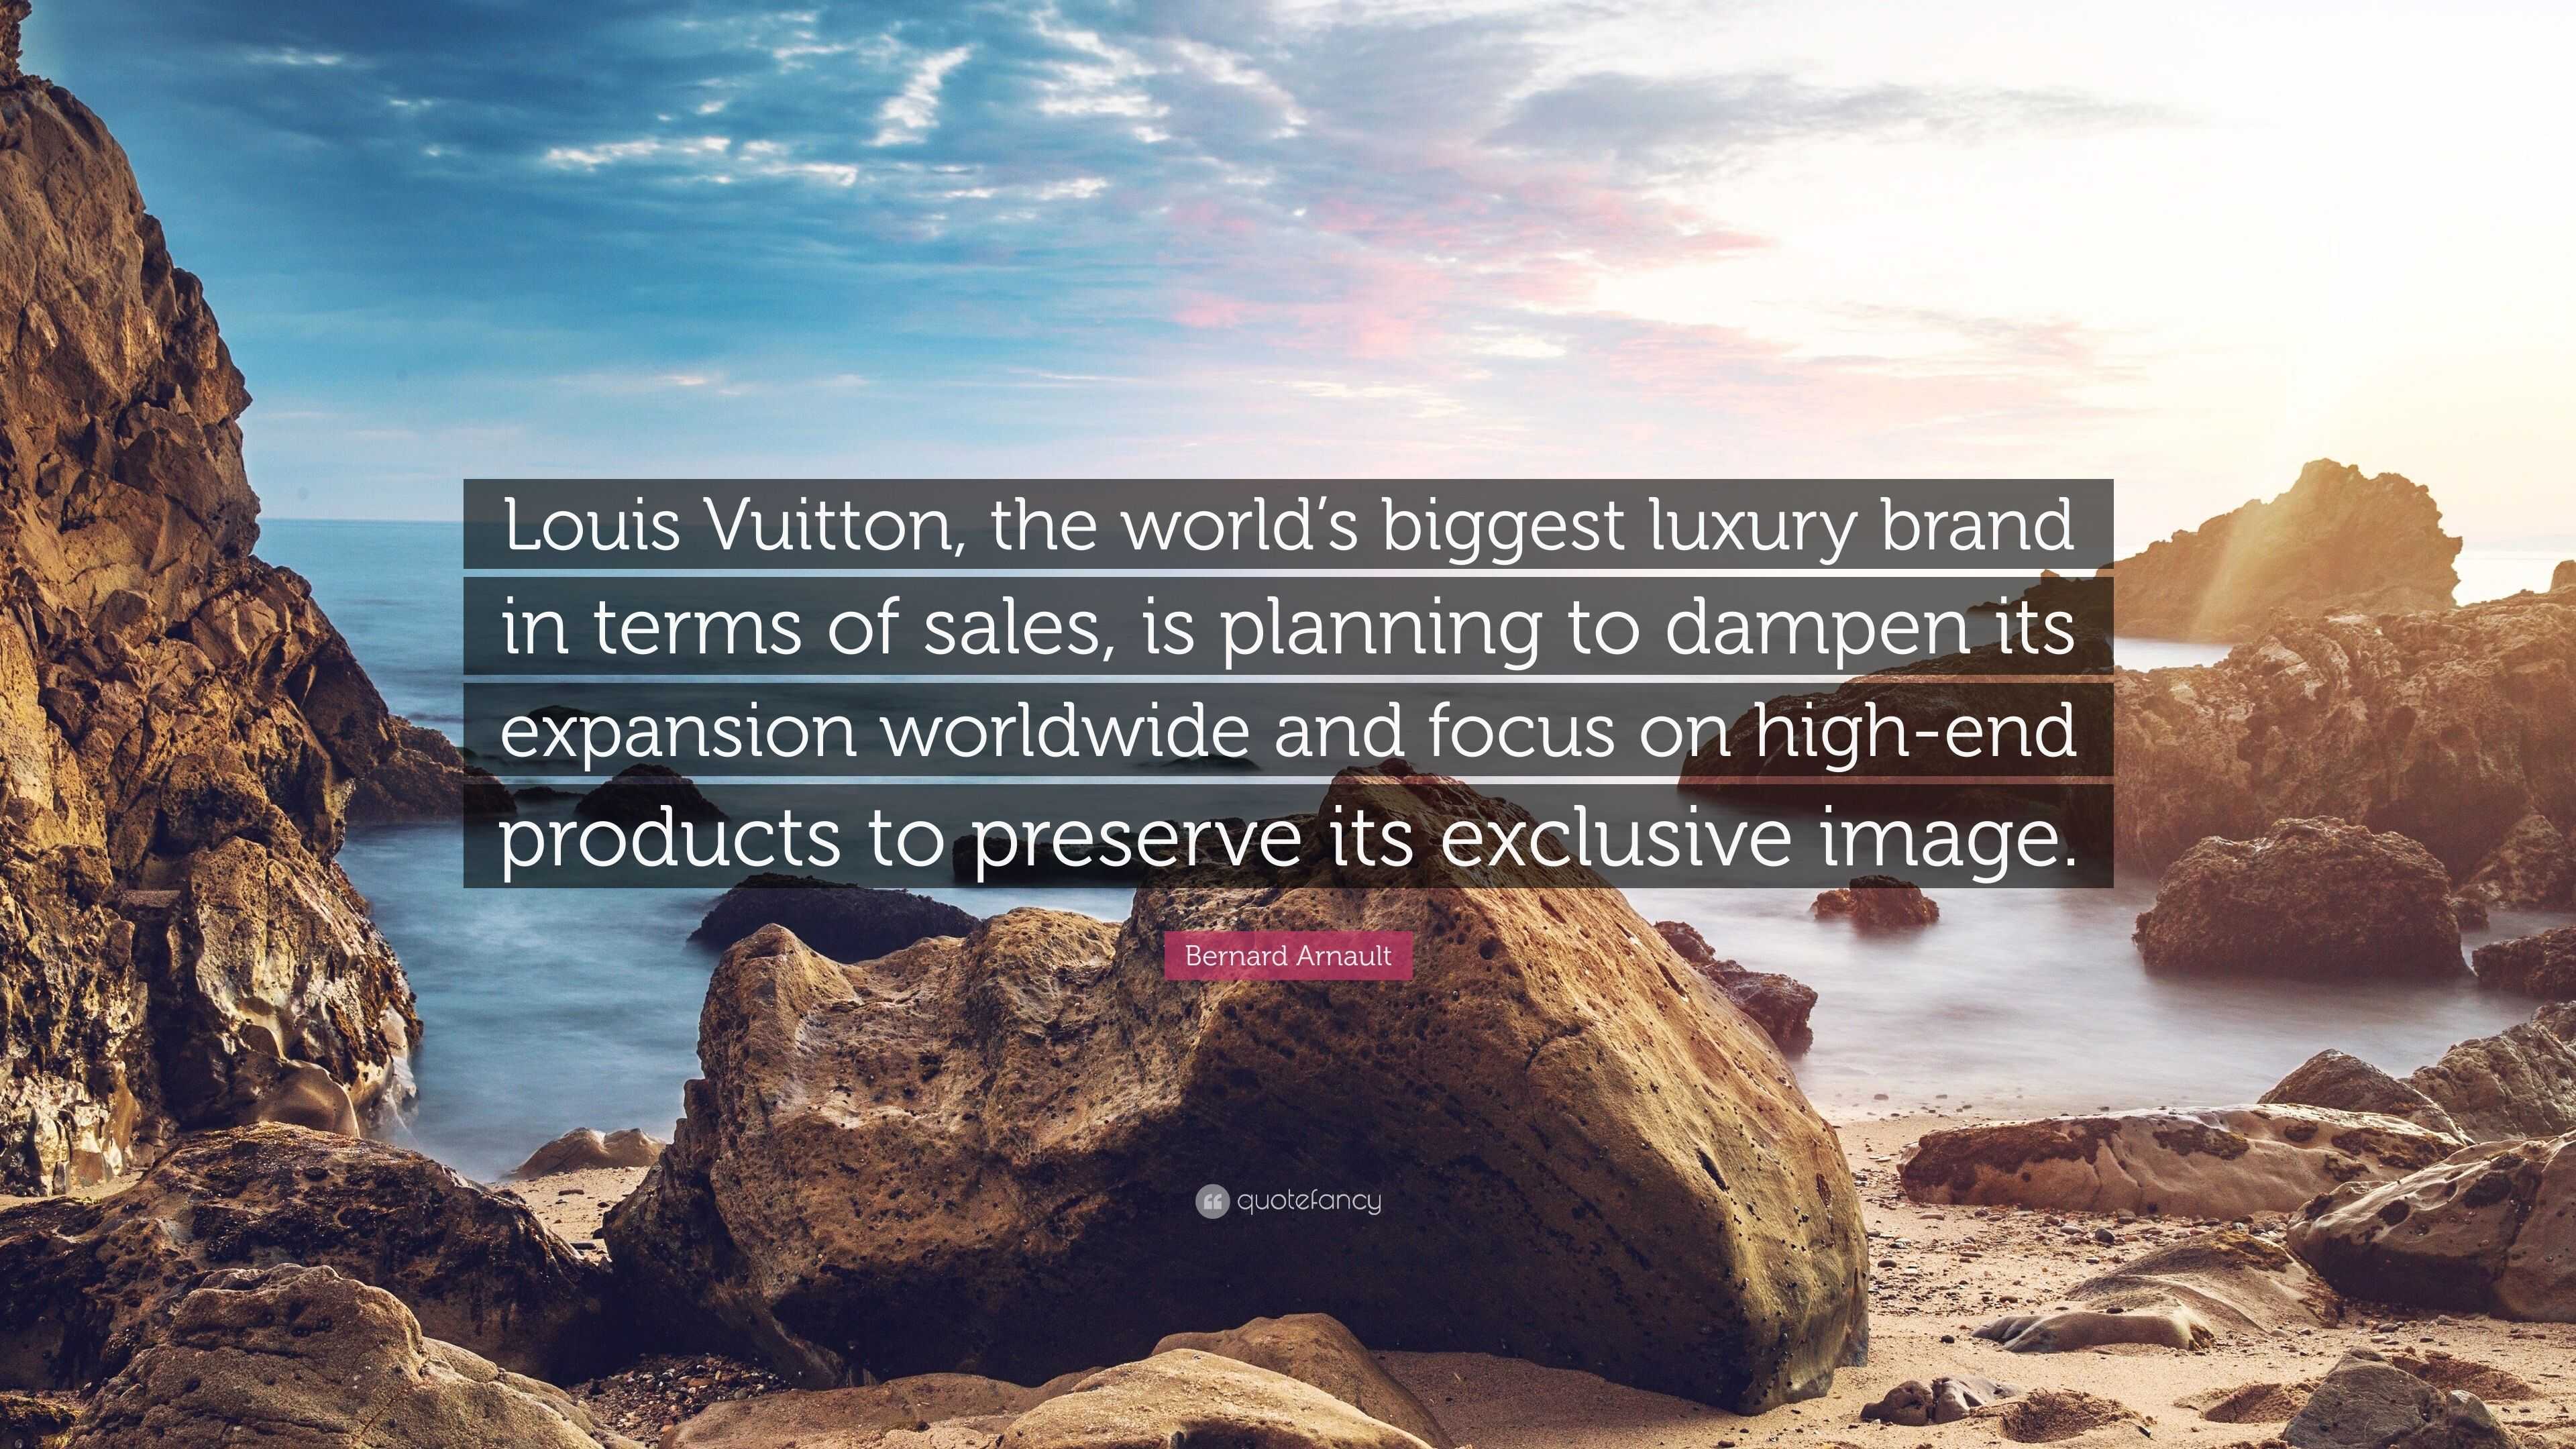 Bernard Arnault Quote: “Louis Vuitton, the world's biggest luxury brand in  terms of sales, is planning to dampen its expansion worldwide and foc”